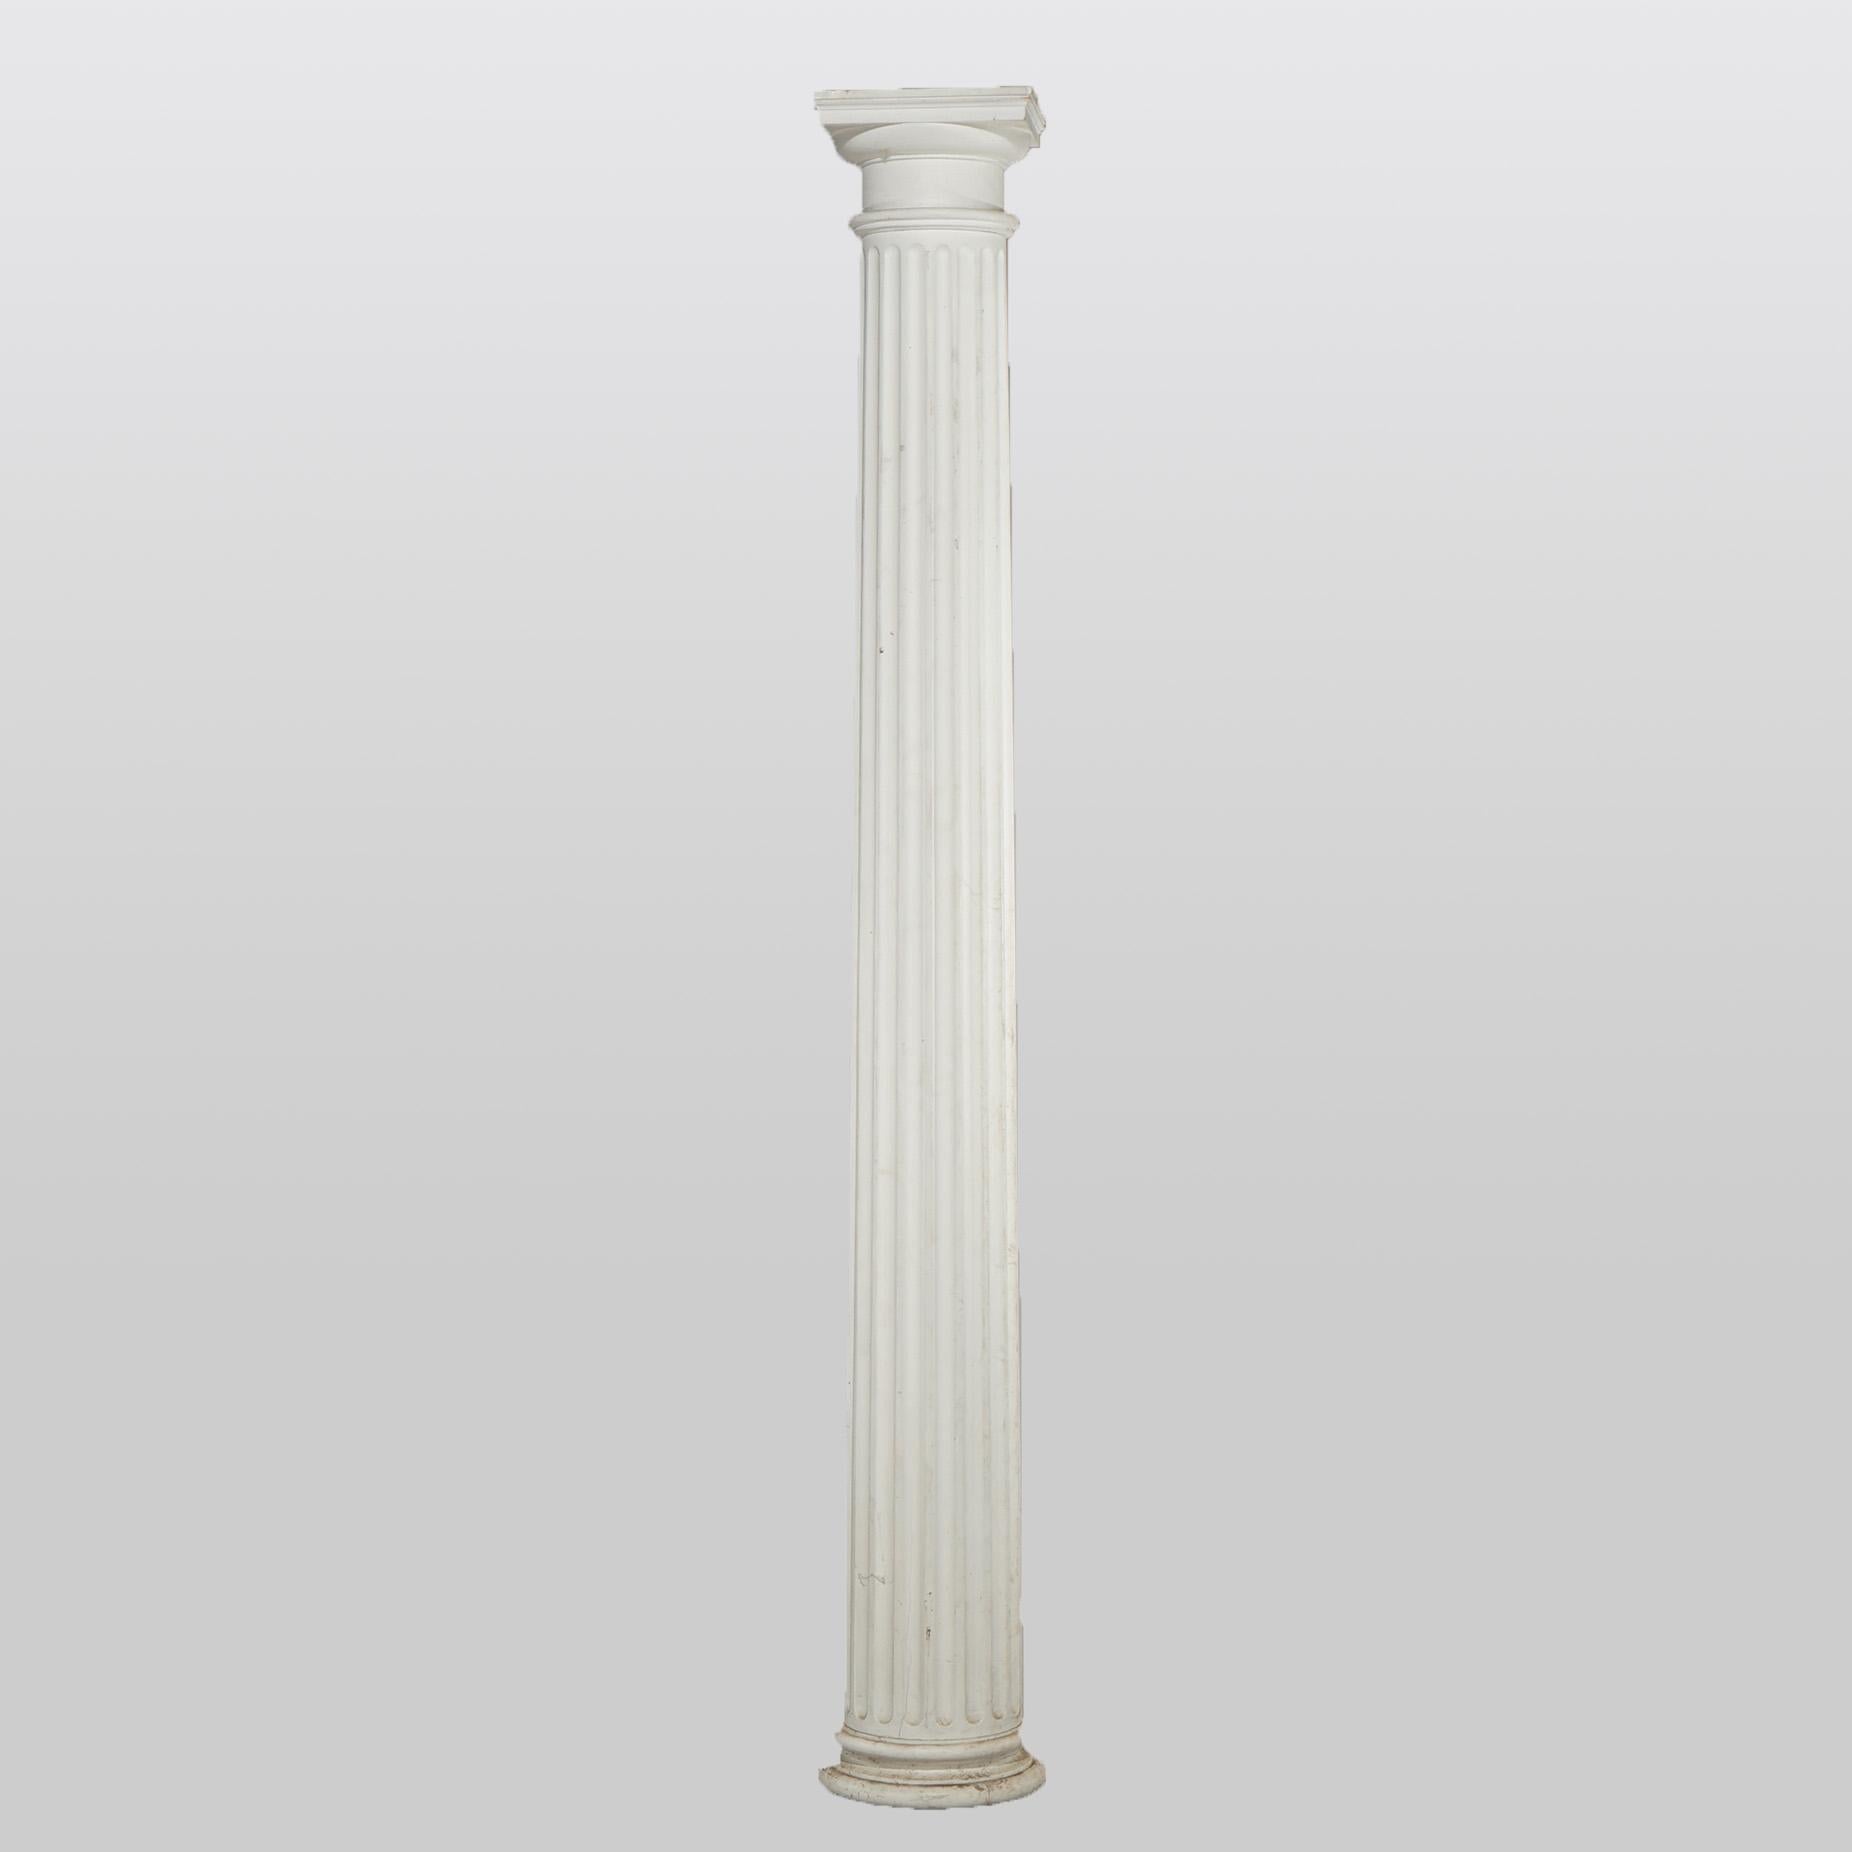 20th Century Neoclassical Composition Tall Doric Form Column, 94